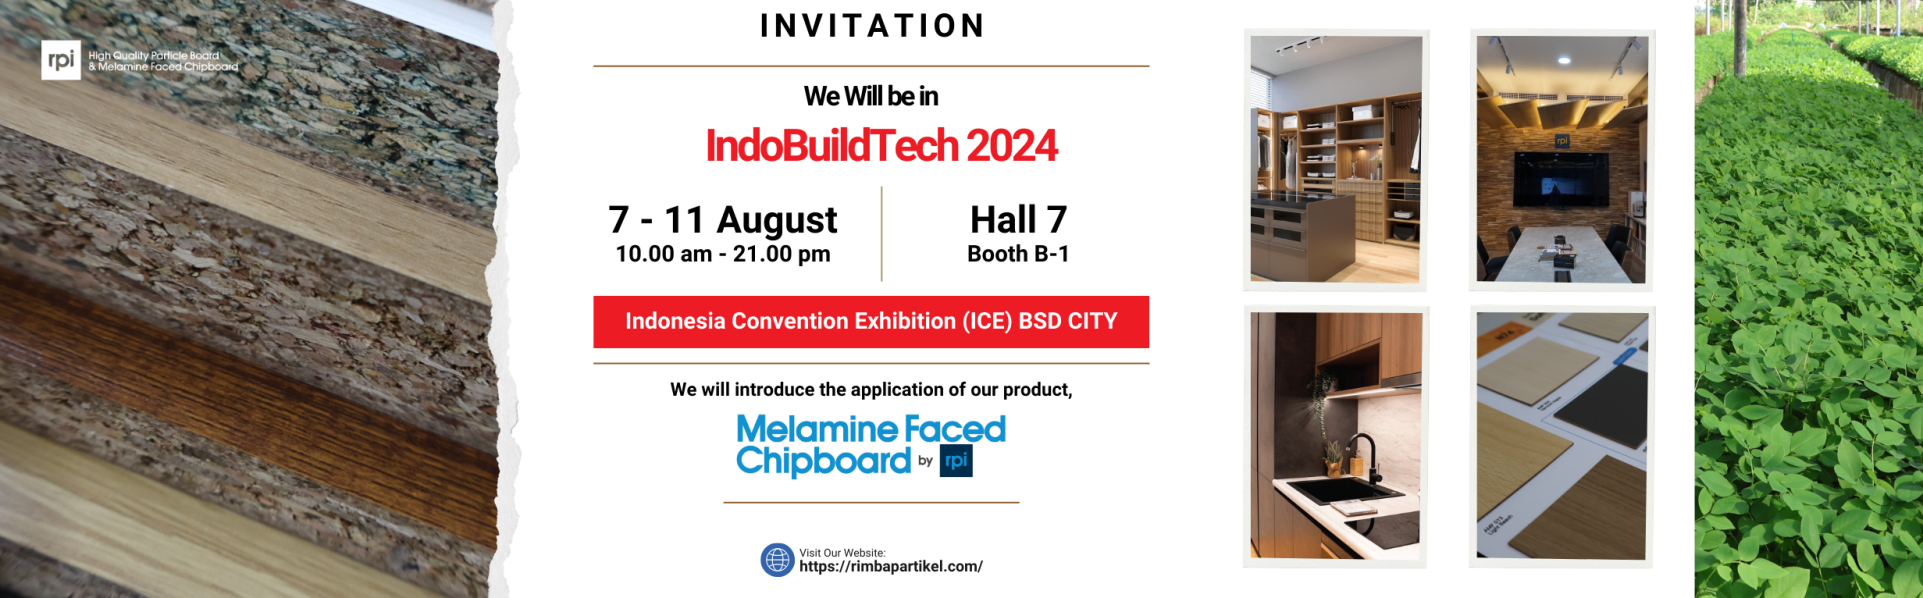 Indonesia Convention Exhibition (ICE) BSD CITY